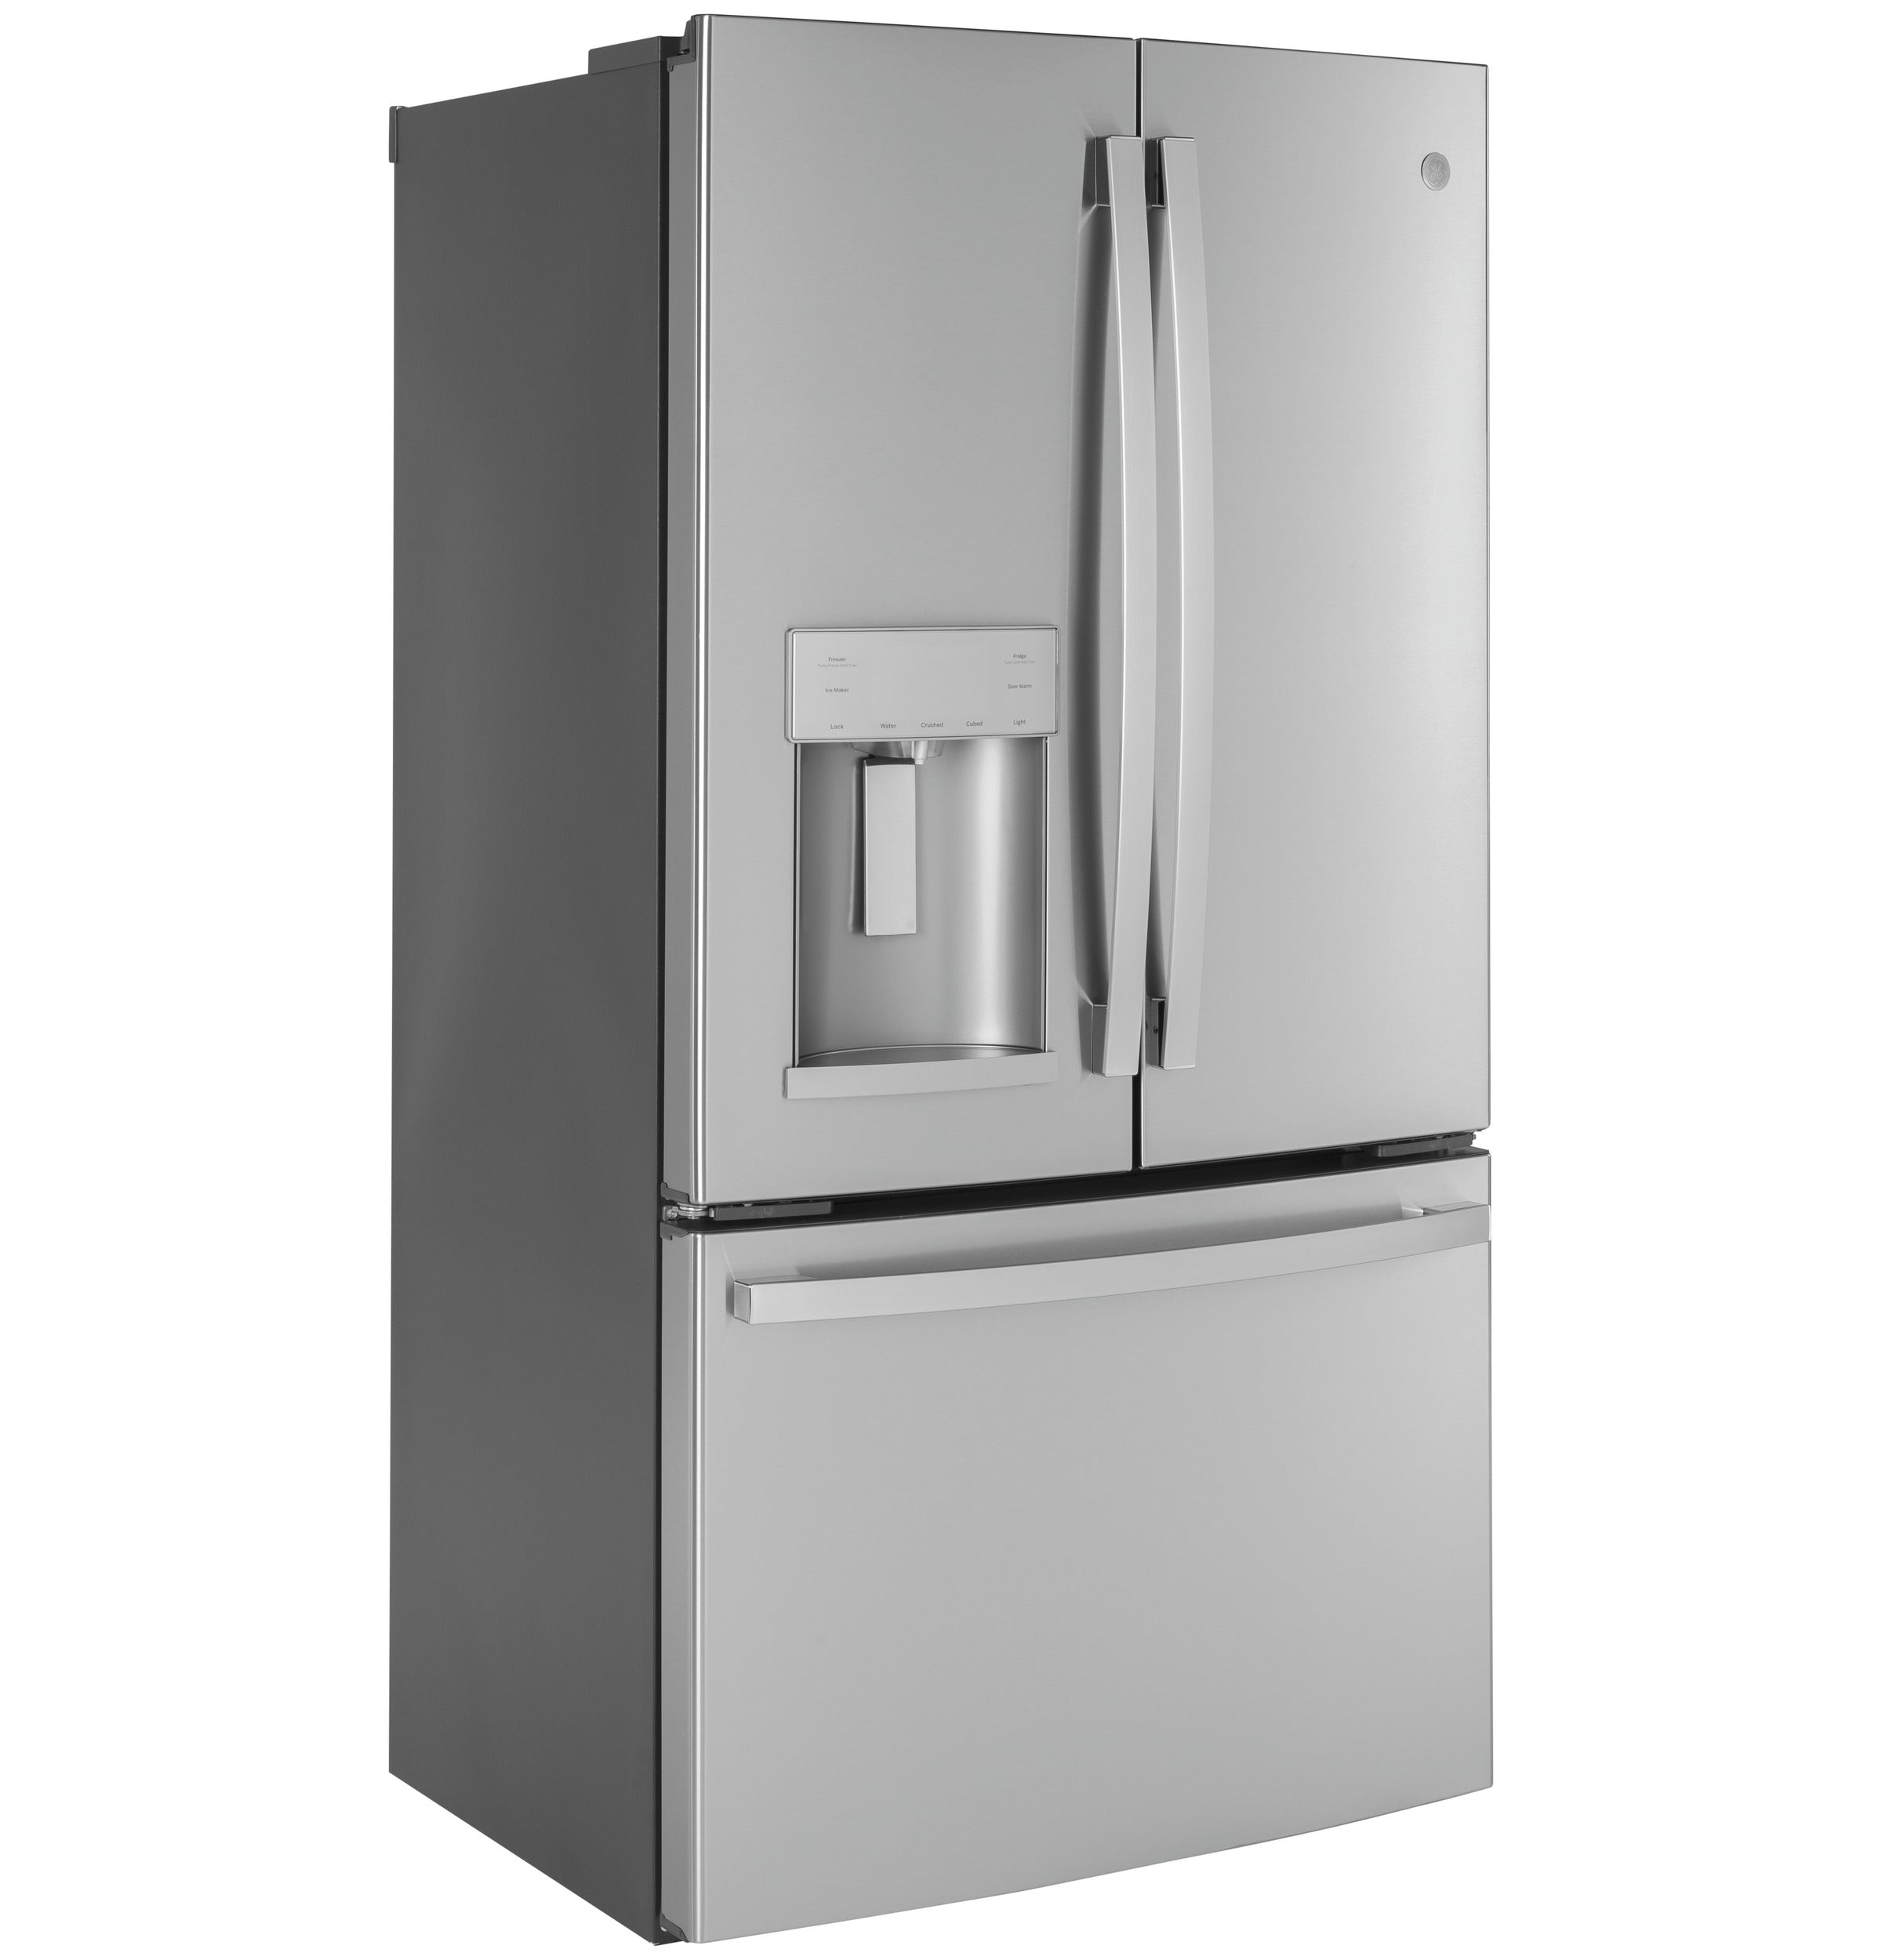 GE - 35.7 Inch 22.1 cu. ft French Door Refrigerator in Stainless - GYE22GYNFS